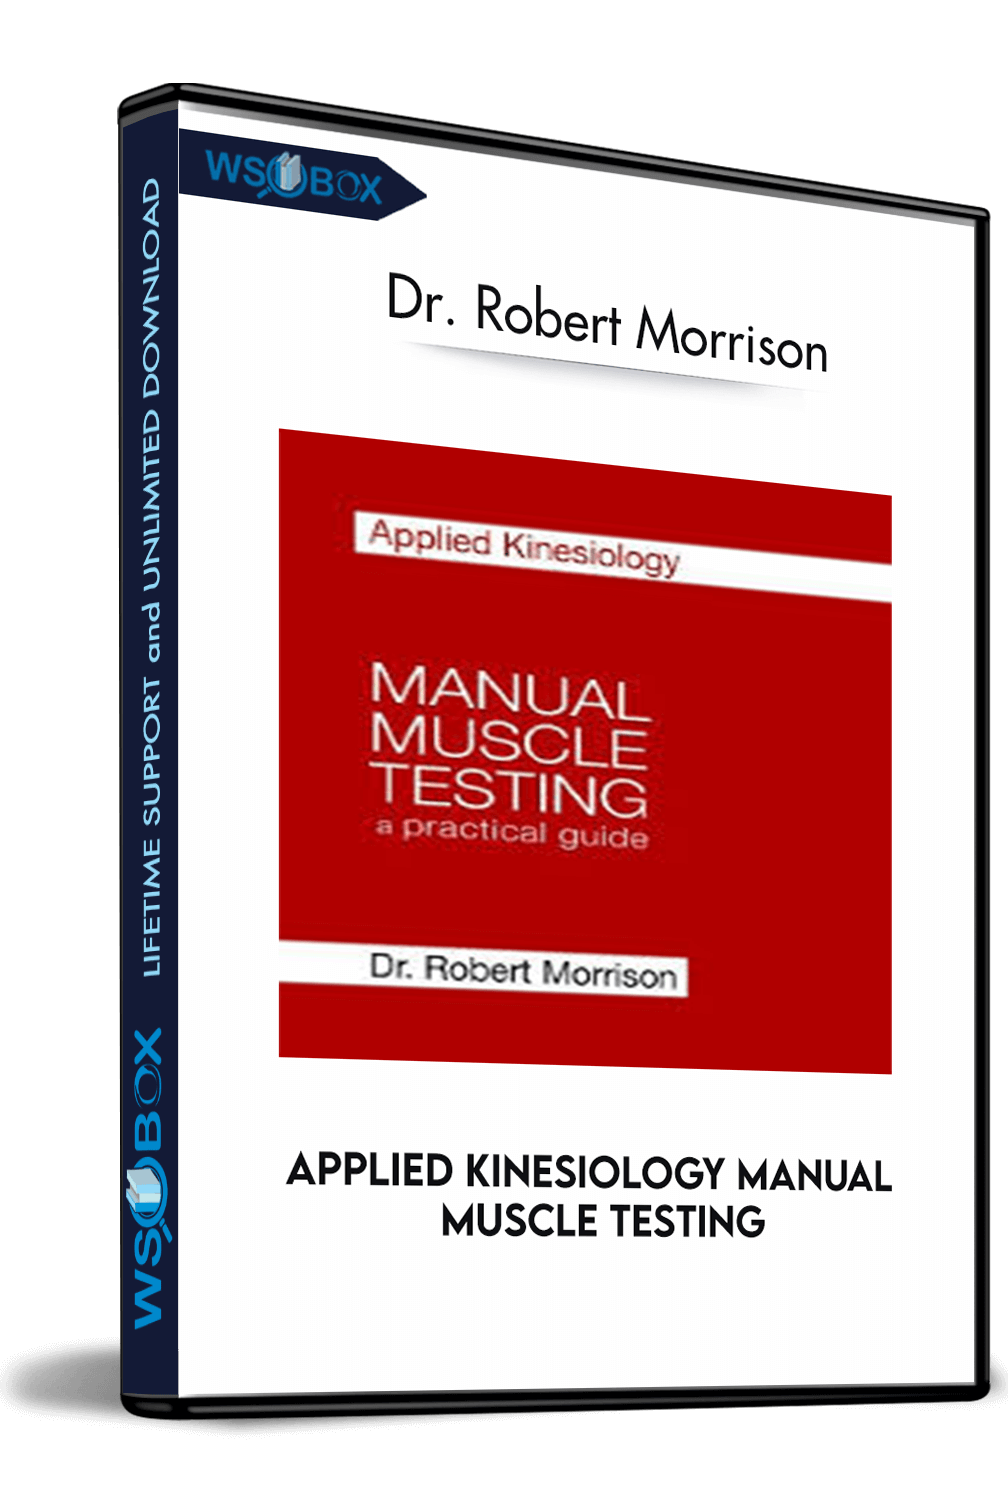 applied-kinesiology-manual-muscle-testing-dr-robert-morrison